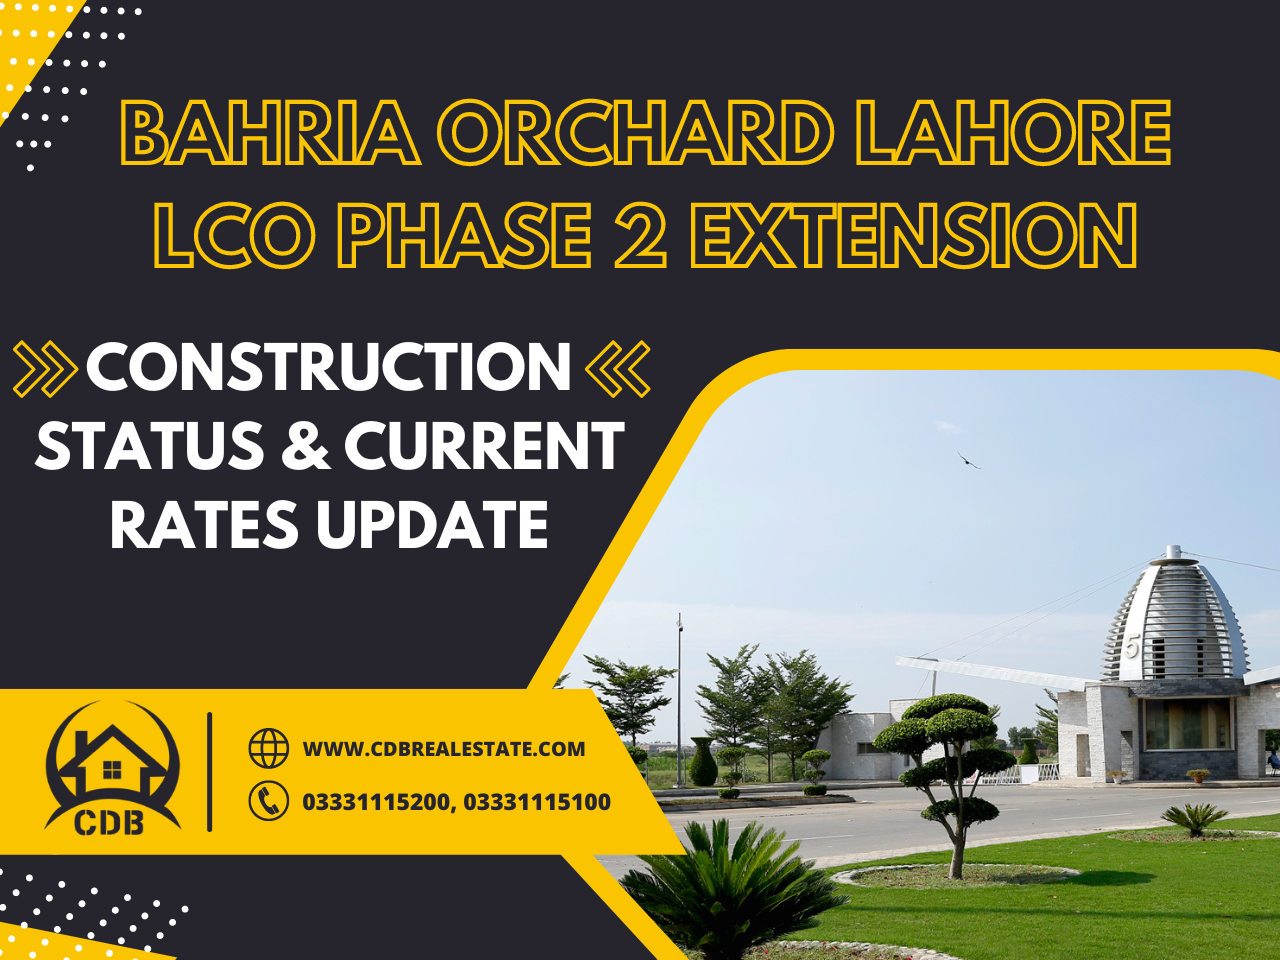 Bahria Orchard Lahore LCO Phase 2 Extension Construction Status & Current Rates Update